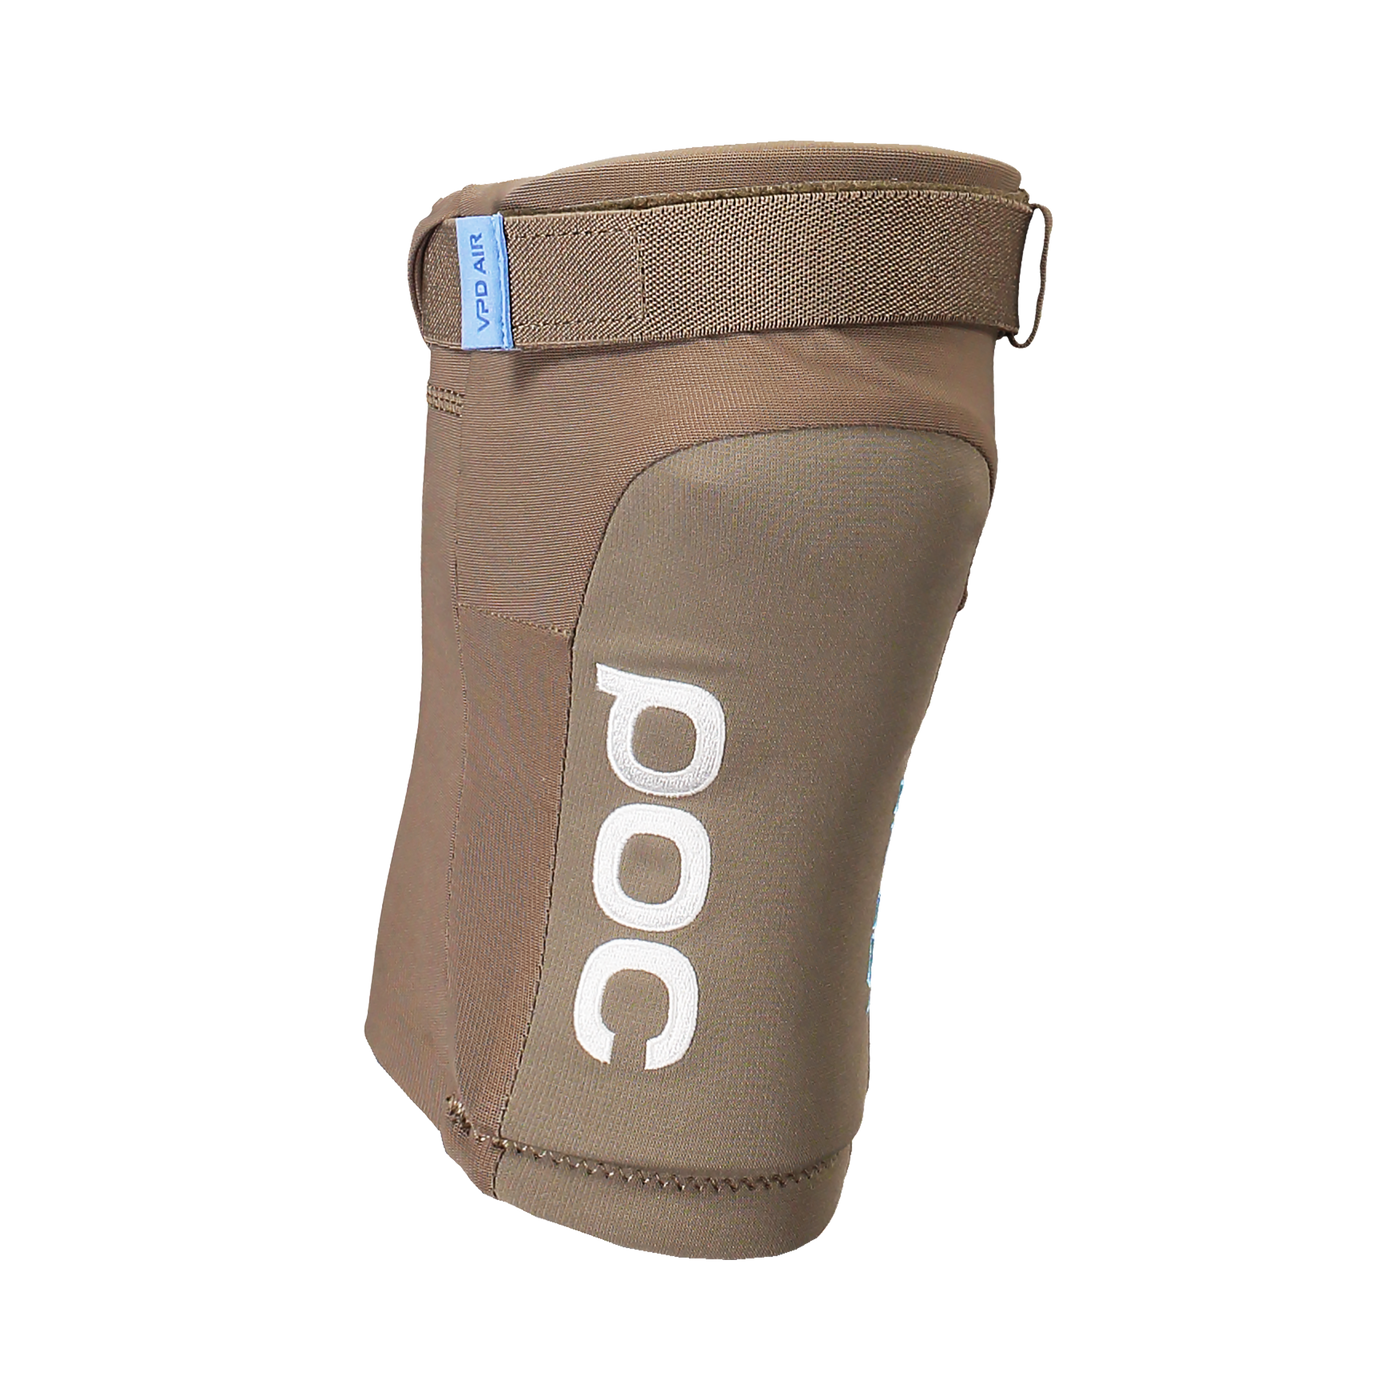 POC Joint VPD Air Knee - Open Box Return PROTECTIVE GEAR POC XS/S Obsydian Brown 